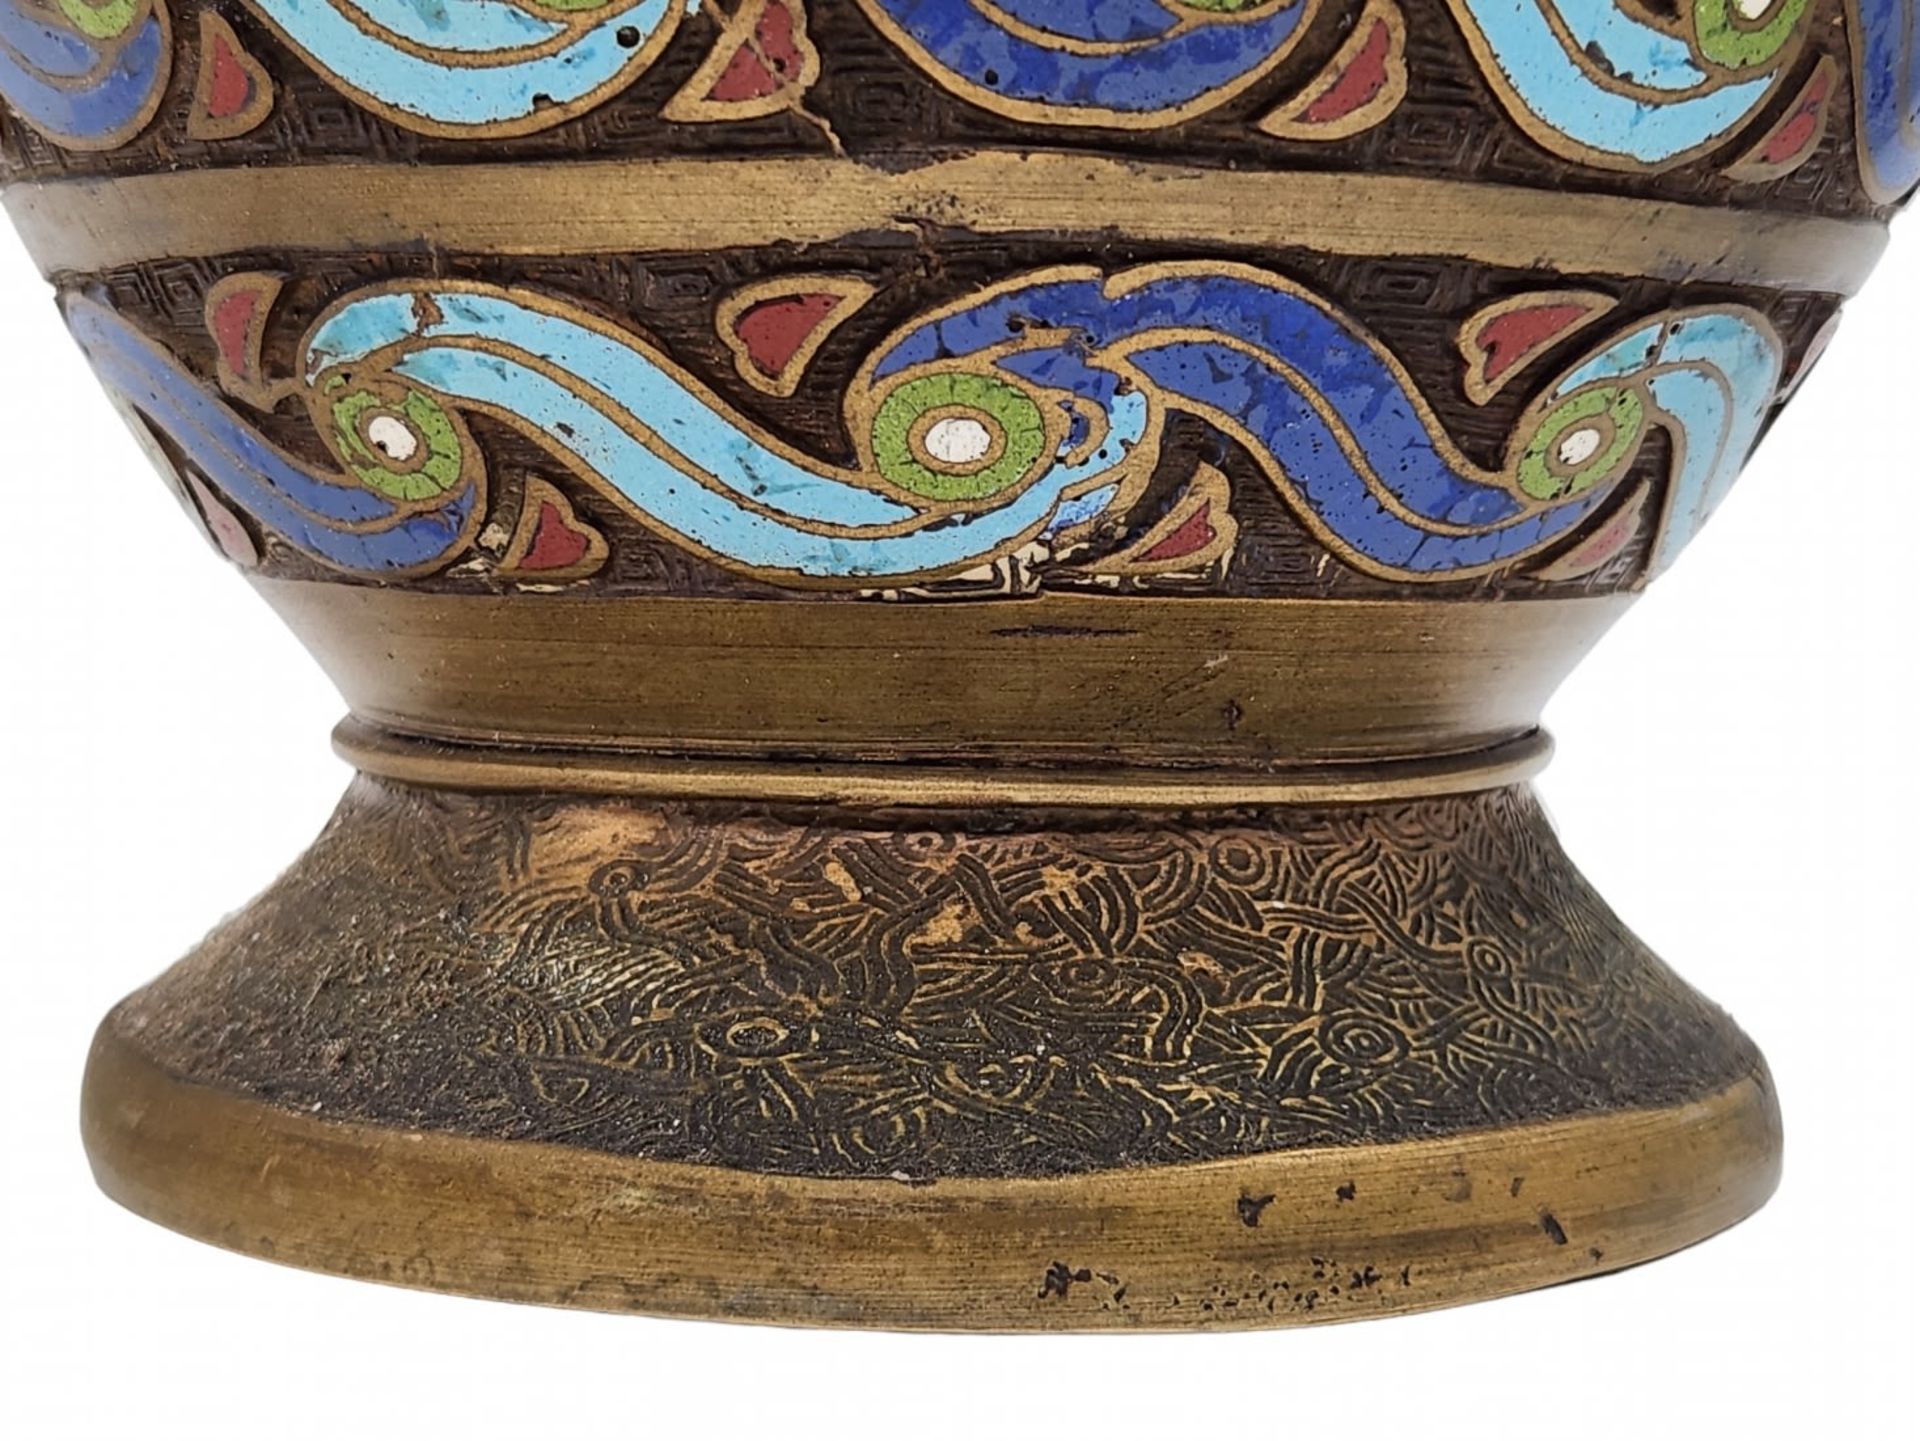 An antique Chinese urn from the 19th century, the urn is made of bronze and 'Champleve' enamel, - Bild 5 aus 7